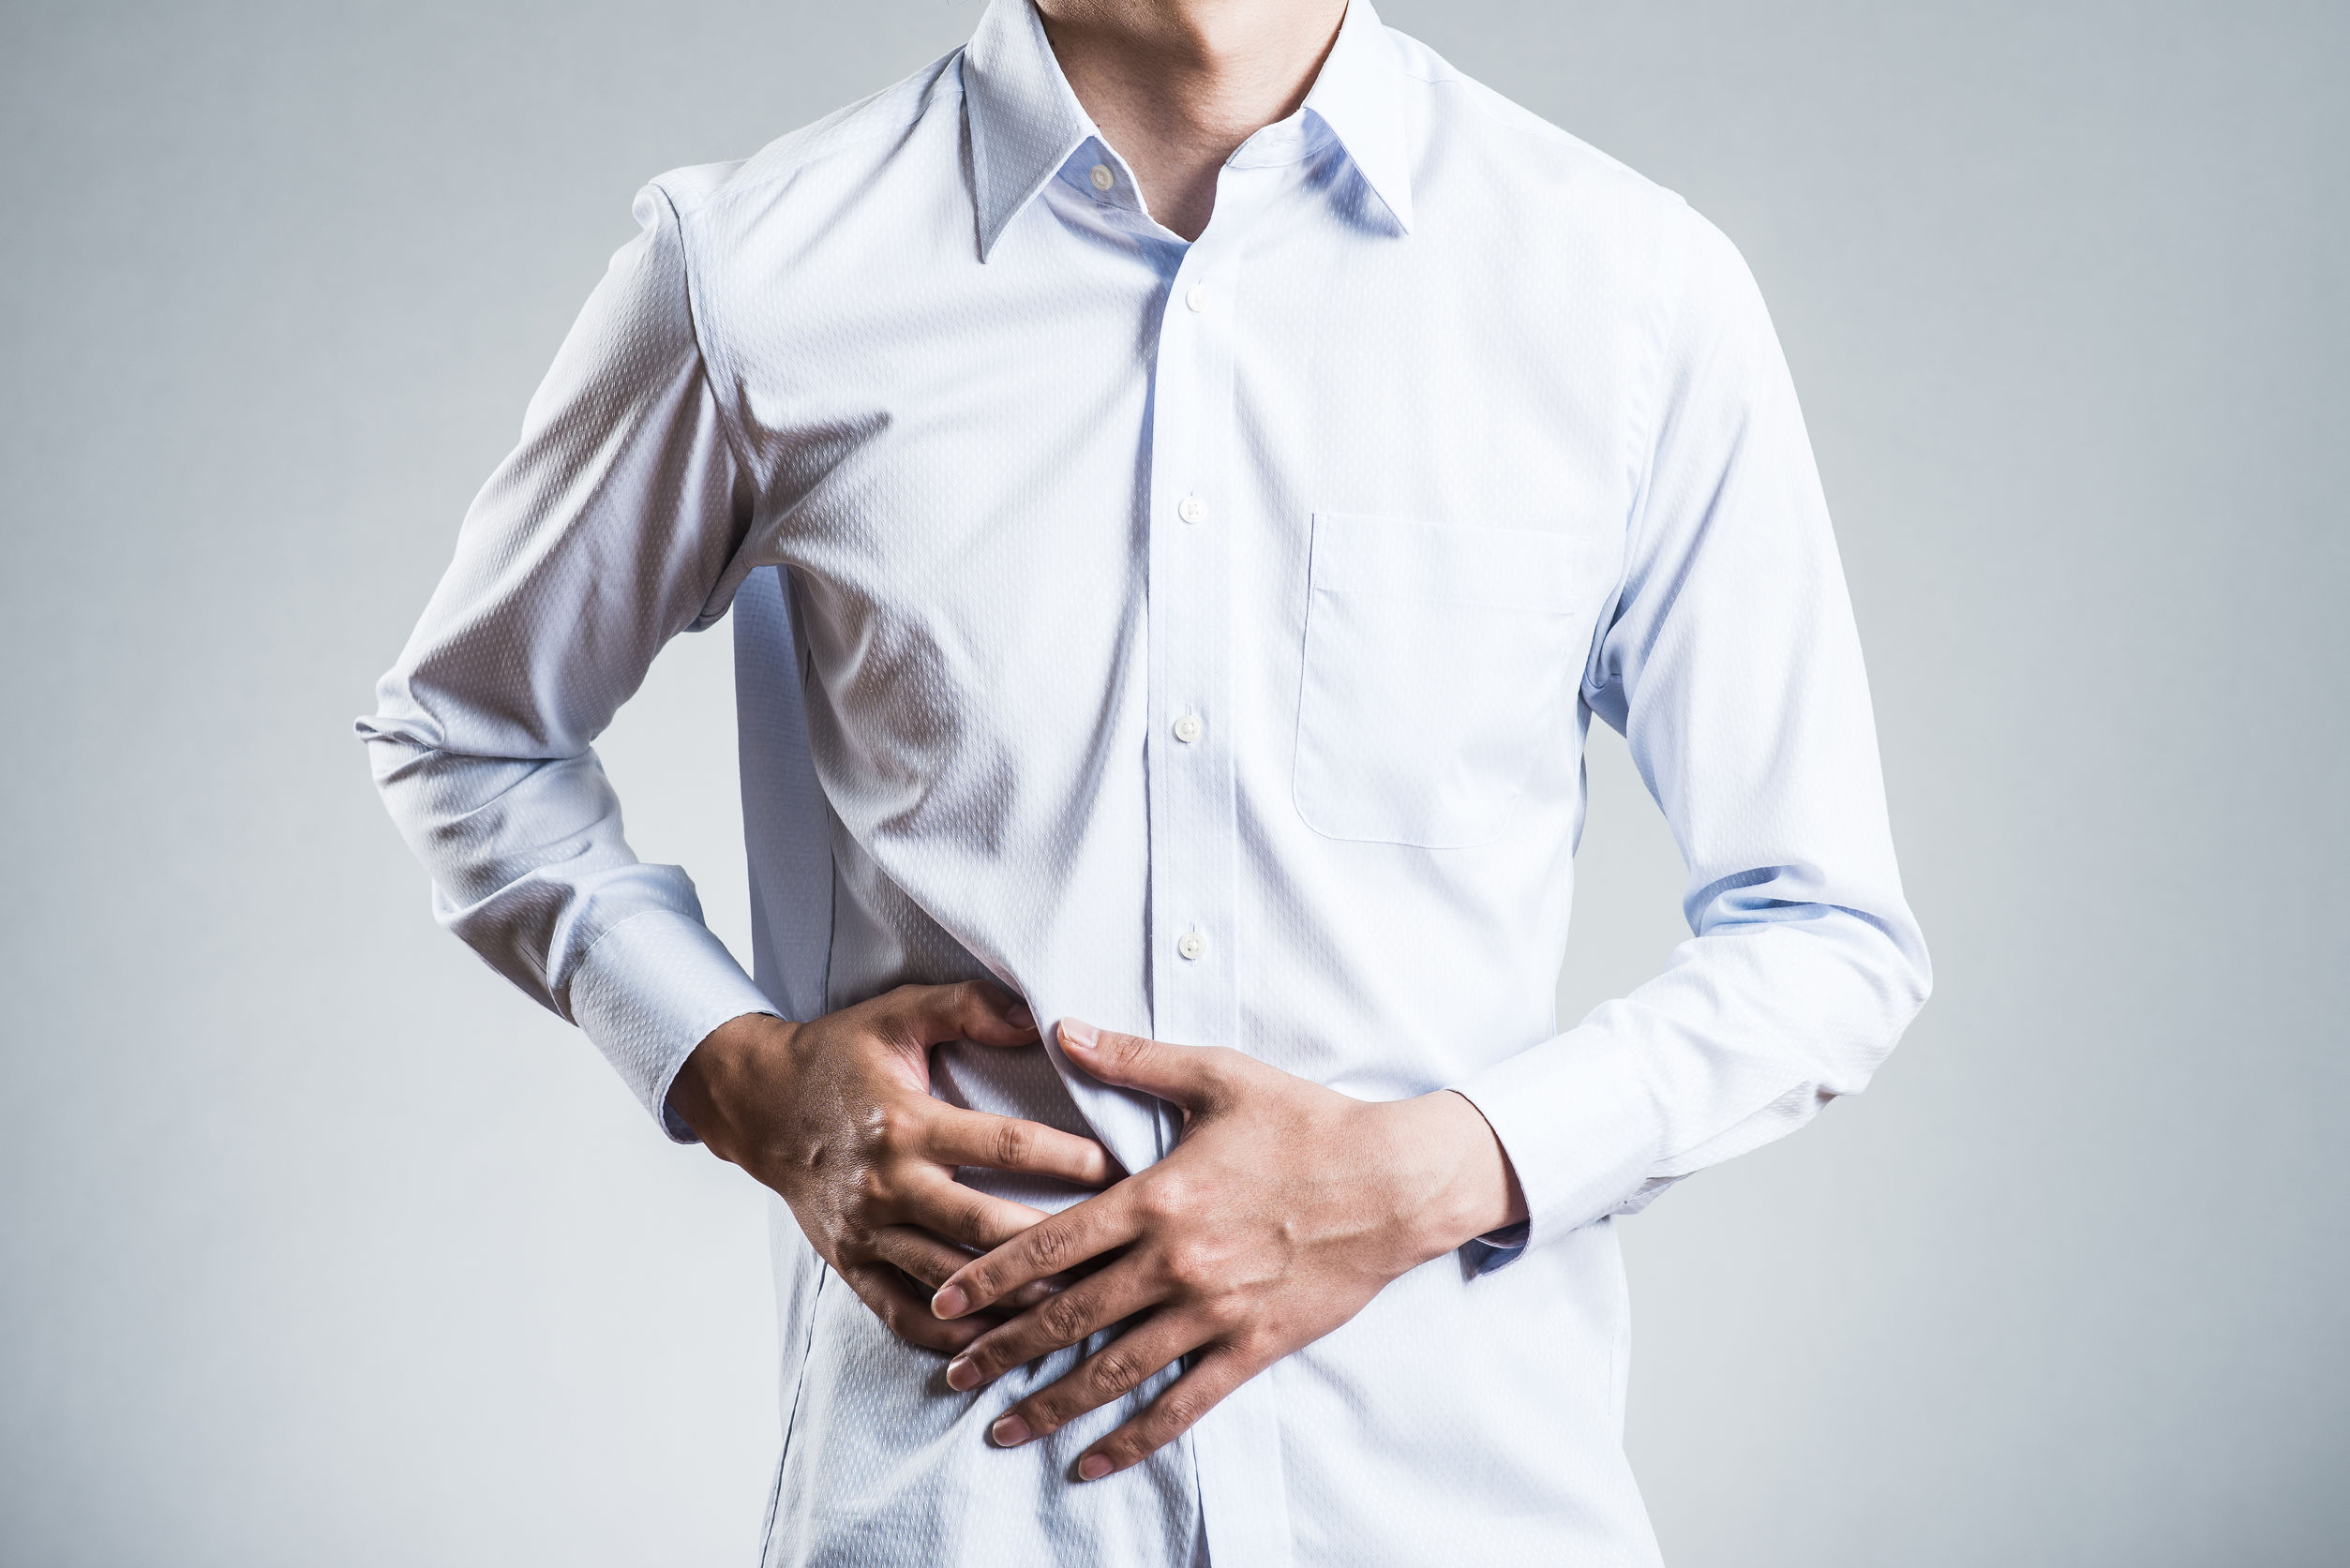 Can gastrointestinal disease be prevented?